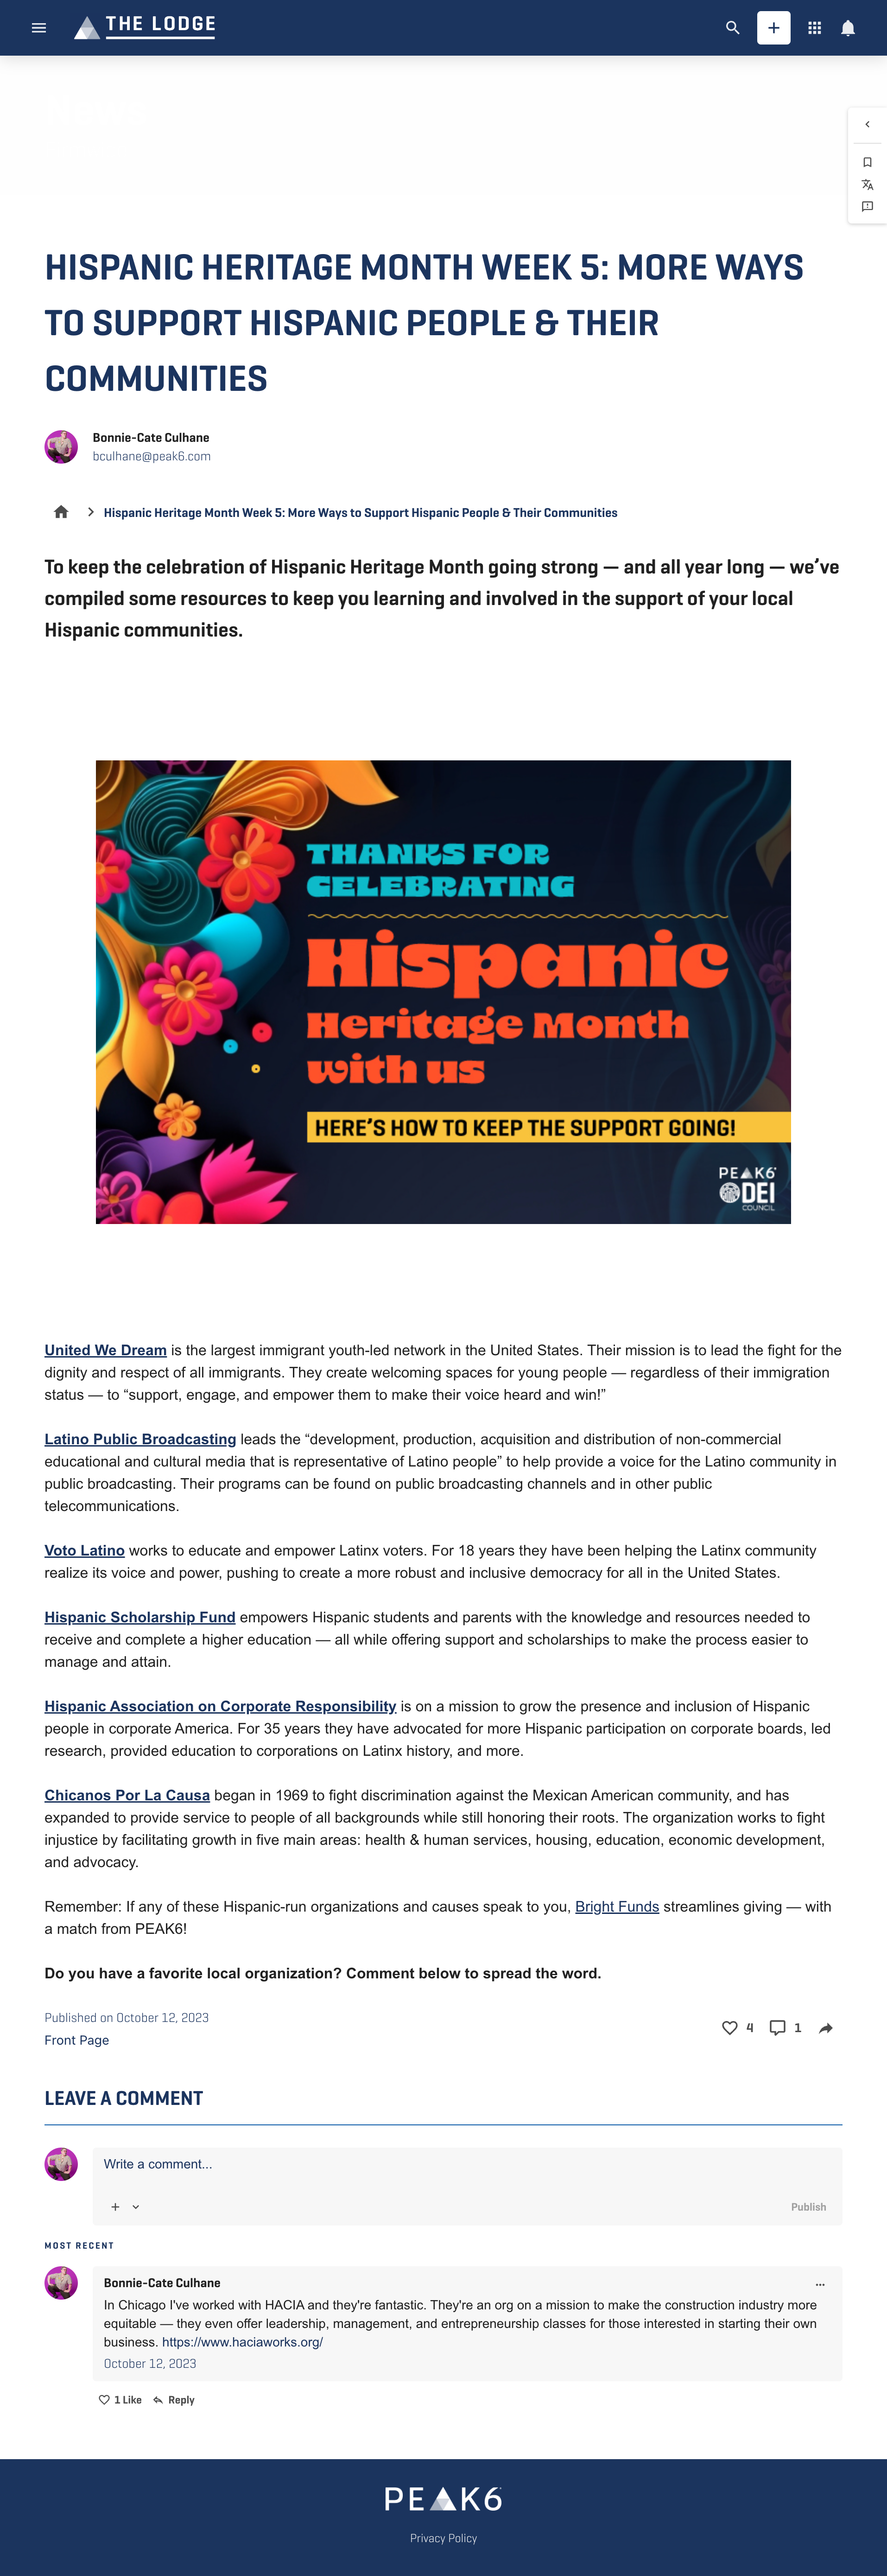 thelodge.peak6.com_home_ls_content_6519470704033792_hispanic-heritage-month-week-5-more-ways-to-support-hispanic-people-their-communities.png